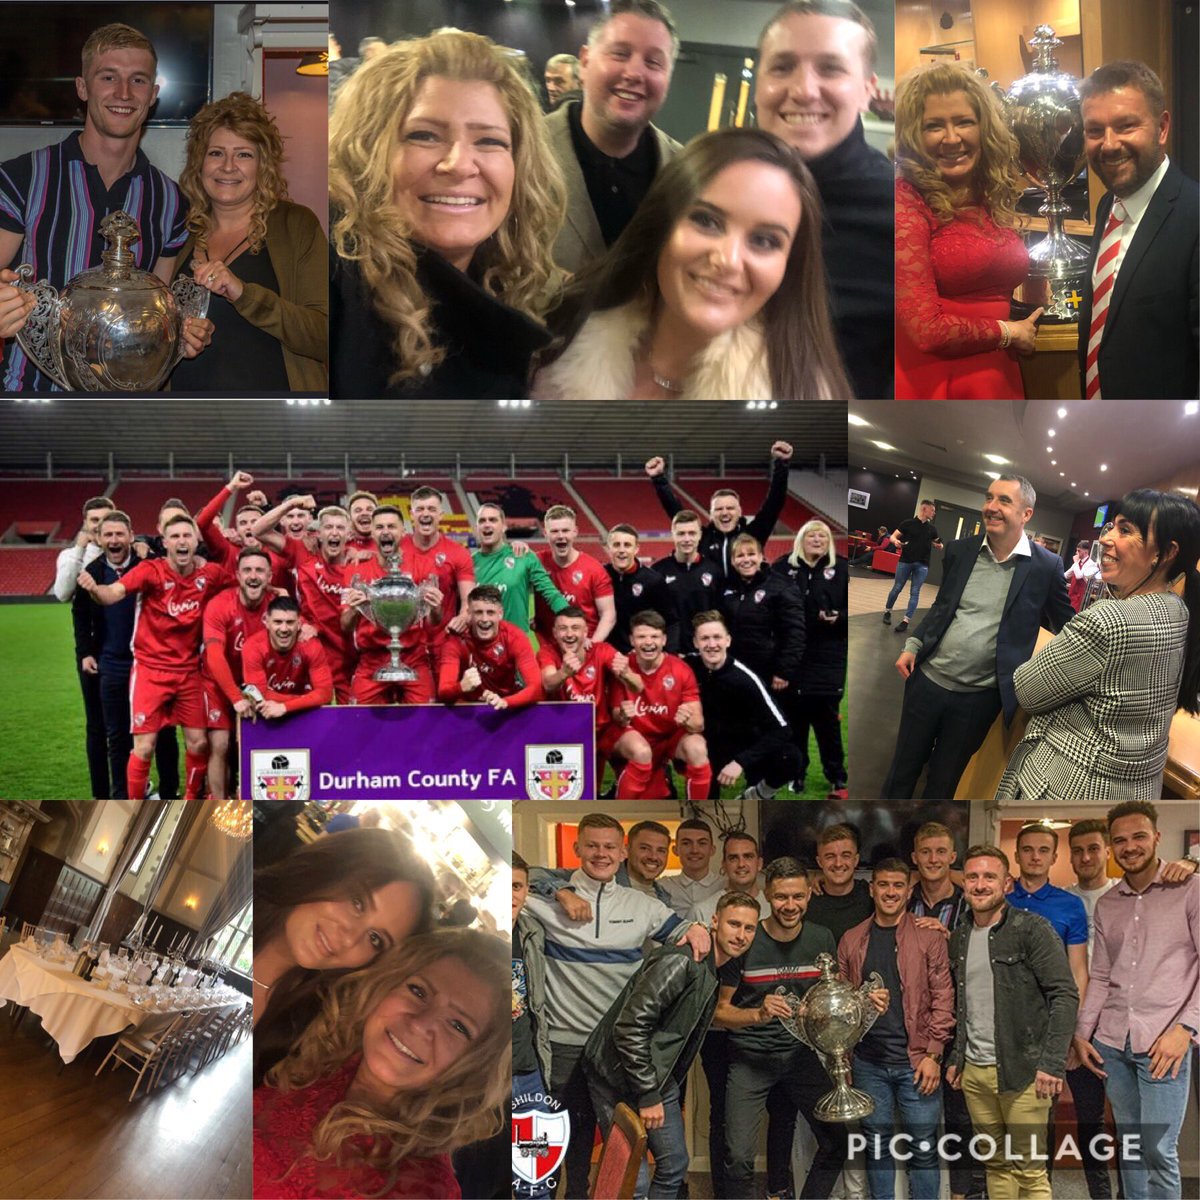 May got off to a cracking start with this lovely lot @Official_SAFC Followed by a 2 day hangover 🤢Bring on the birthday celebrations and the #Bainbridgewedding 🍸🍾🥂👰🏼🤵🏼@zakatkinson9 @AlanBoddy_livin @BlackettLee @daviddent9193 @dianedent111